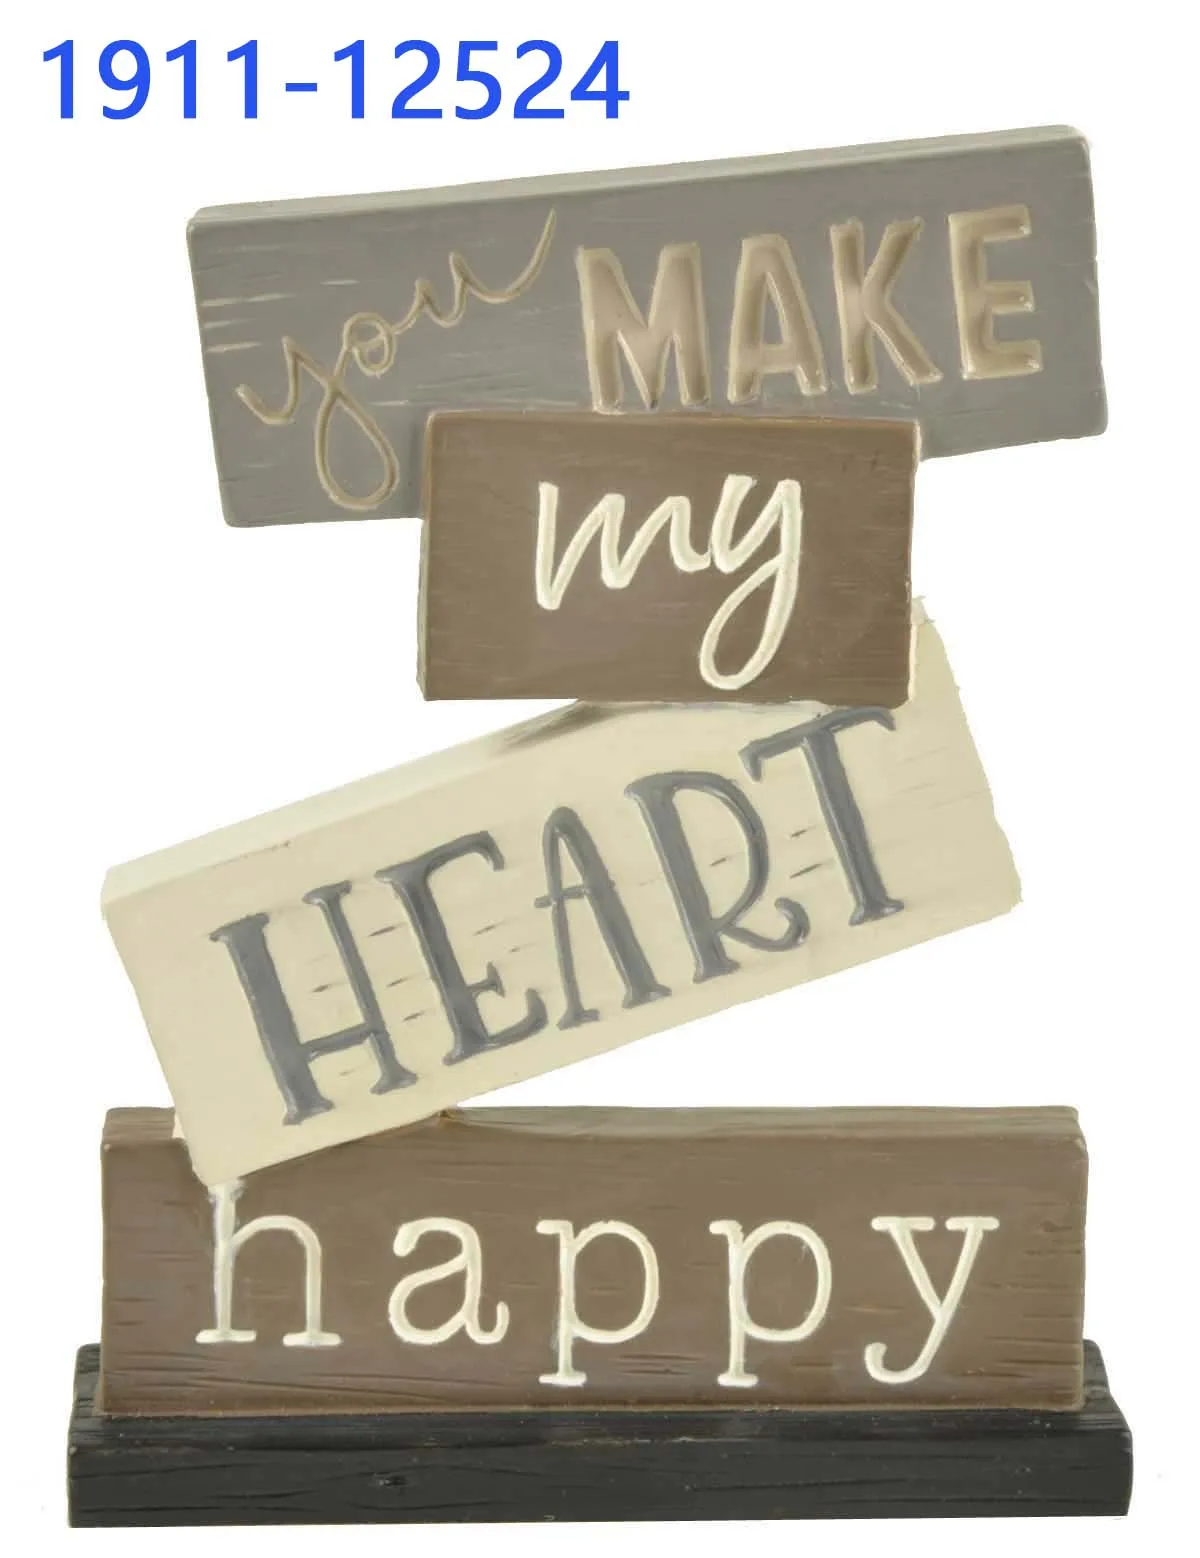 Gifts & Crafts Polyresin Figurines "IT'S YOUR LIFE LIVE IT HAPPY" STACKED BLOCKS Home Decoration Sculpture